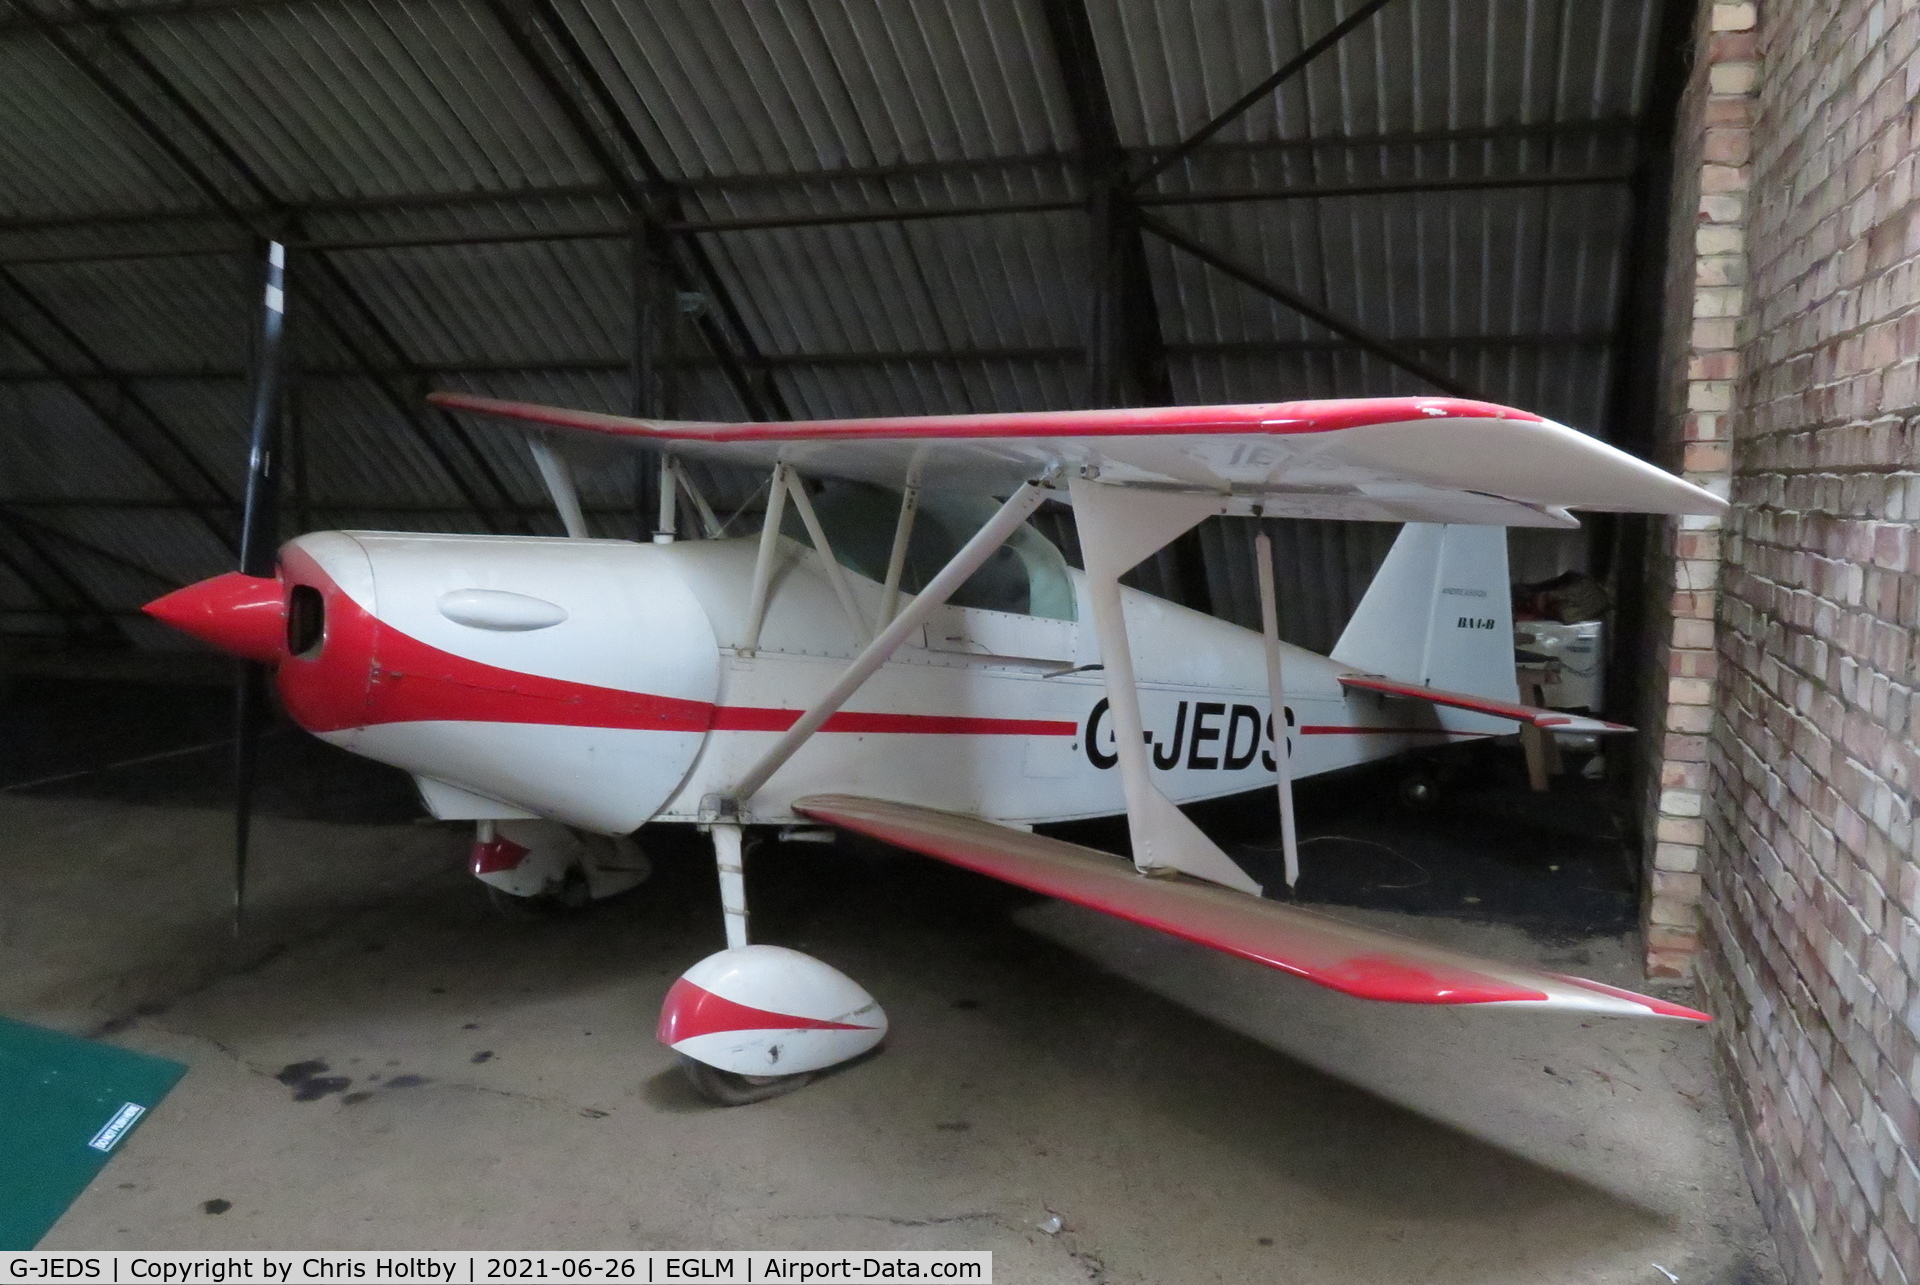 G-JEDS, 1993 Andreasson BA-4B C/N PFA 038-10158, Still gathering dust in the hangar with flat tyres at White Waltham